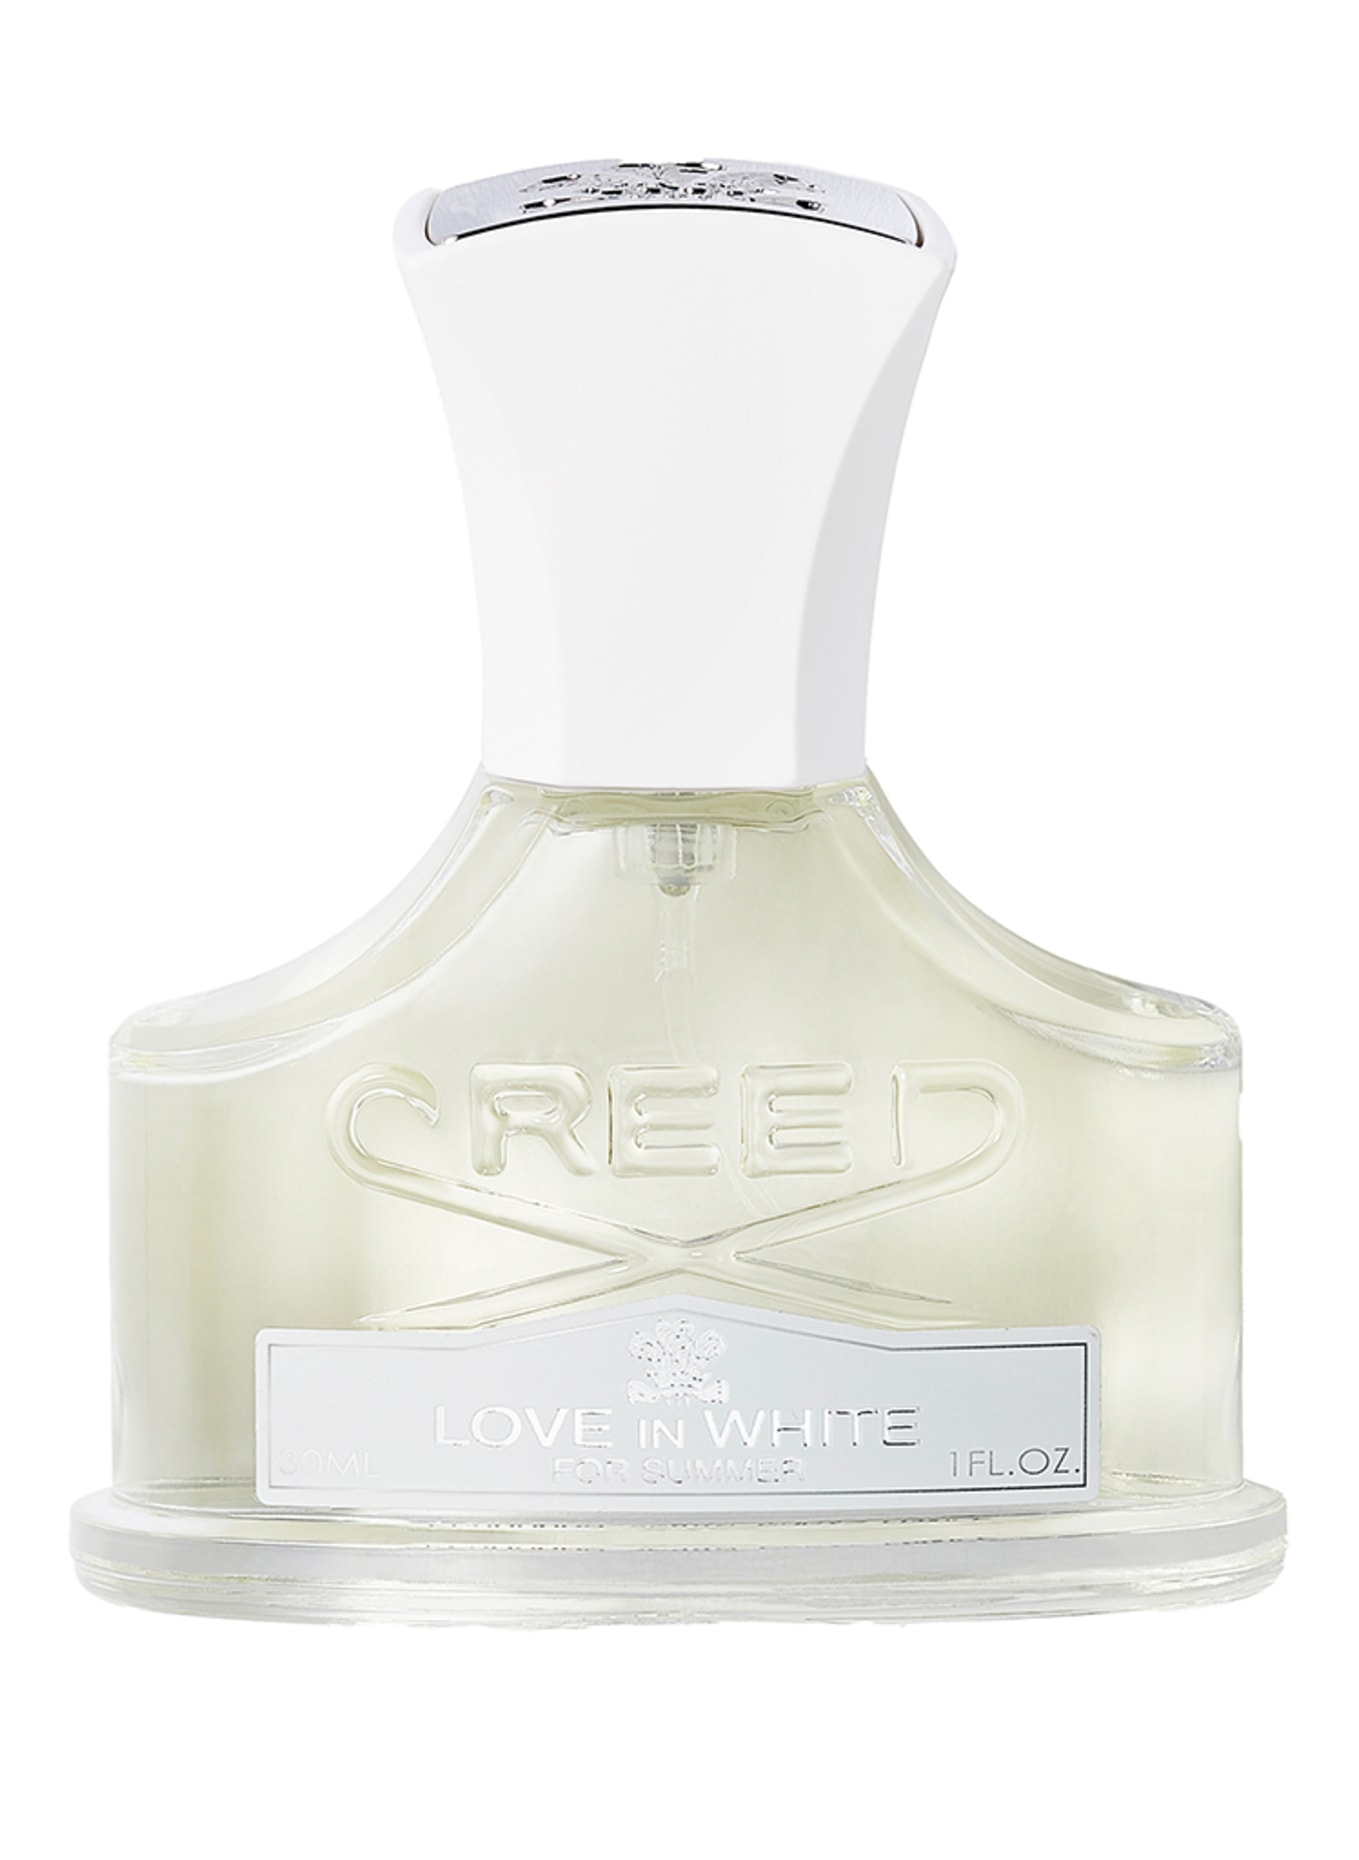 CREED LOVE IN WHITE SUMMER (Obrázek 1)